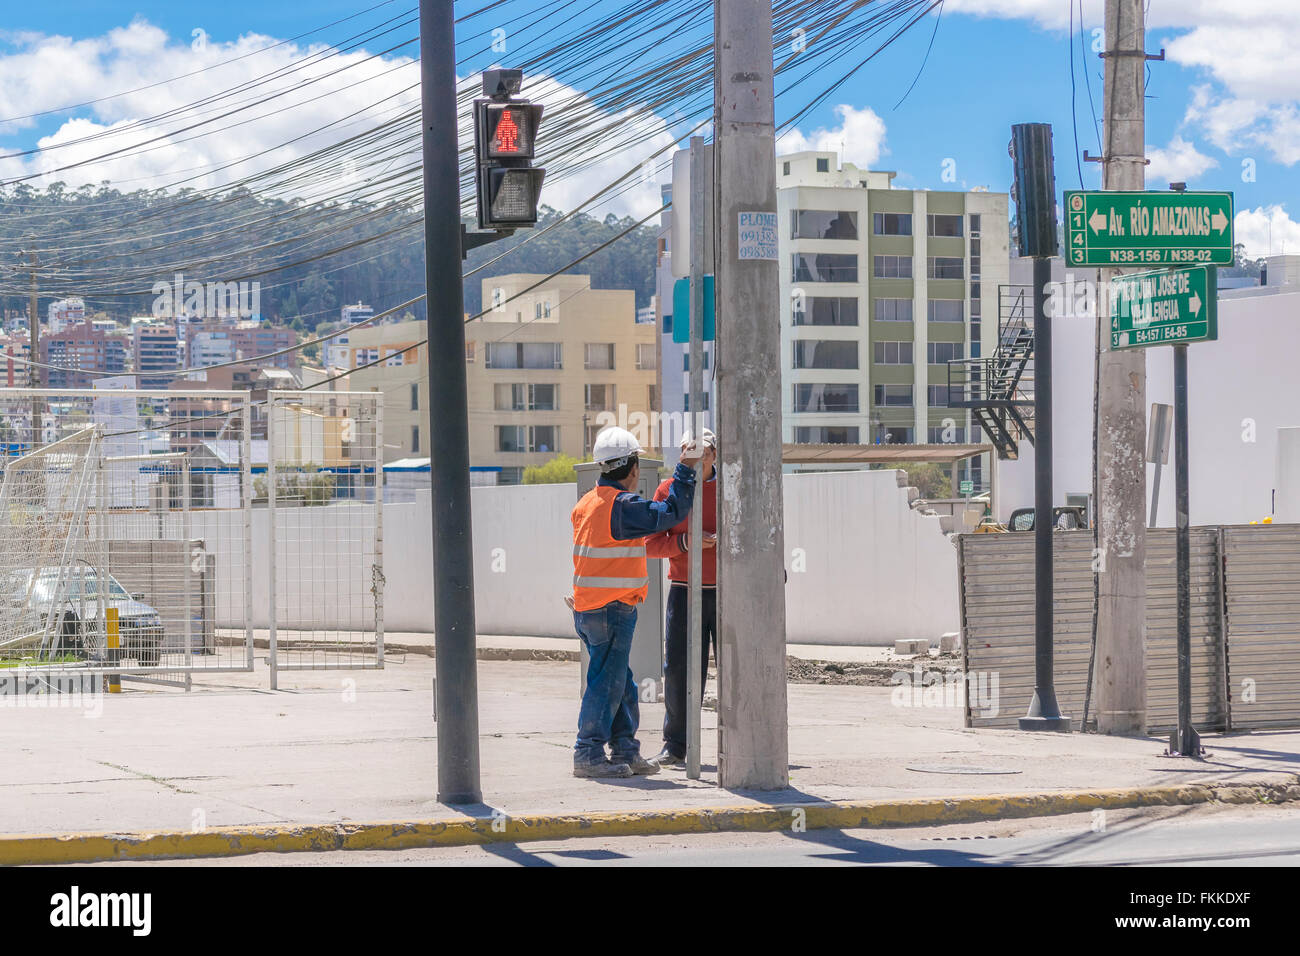 QUITO, ECUADOR, OCTOBER - 2015 - Urban scene of two construction workers talking in outskirts district of Quito city, the capita Stock Photo